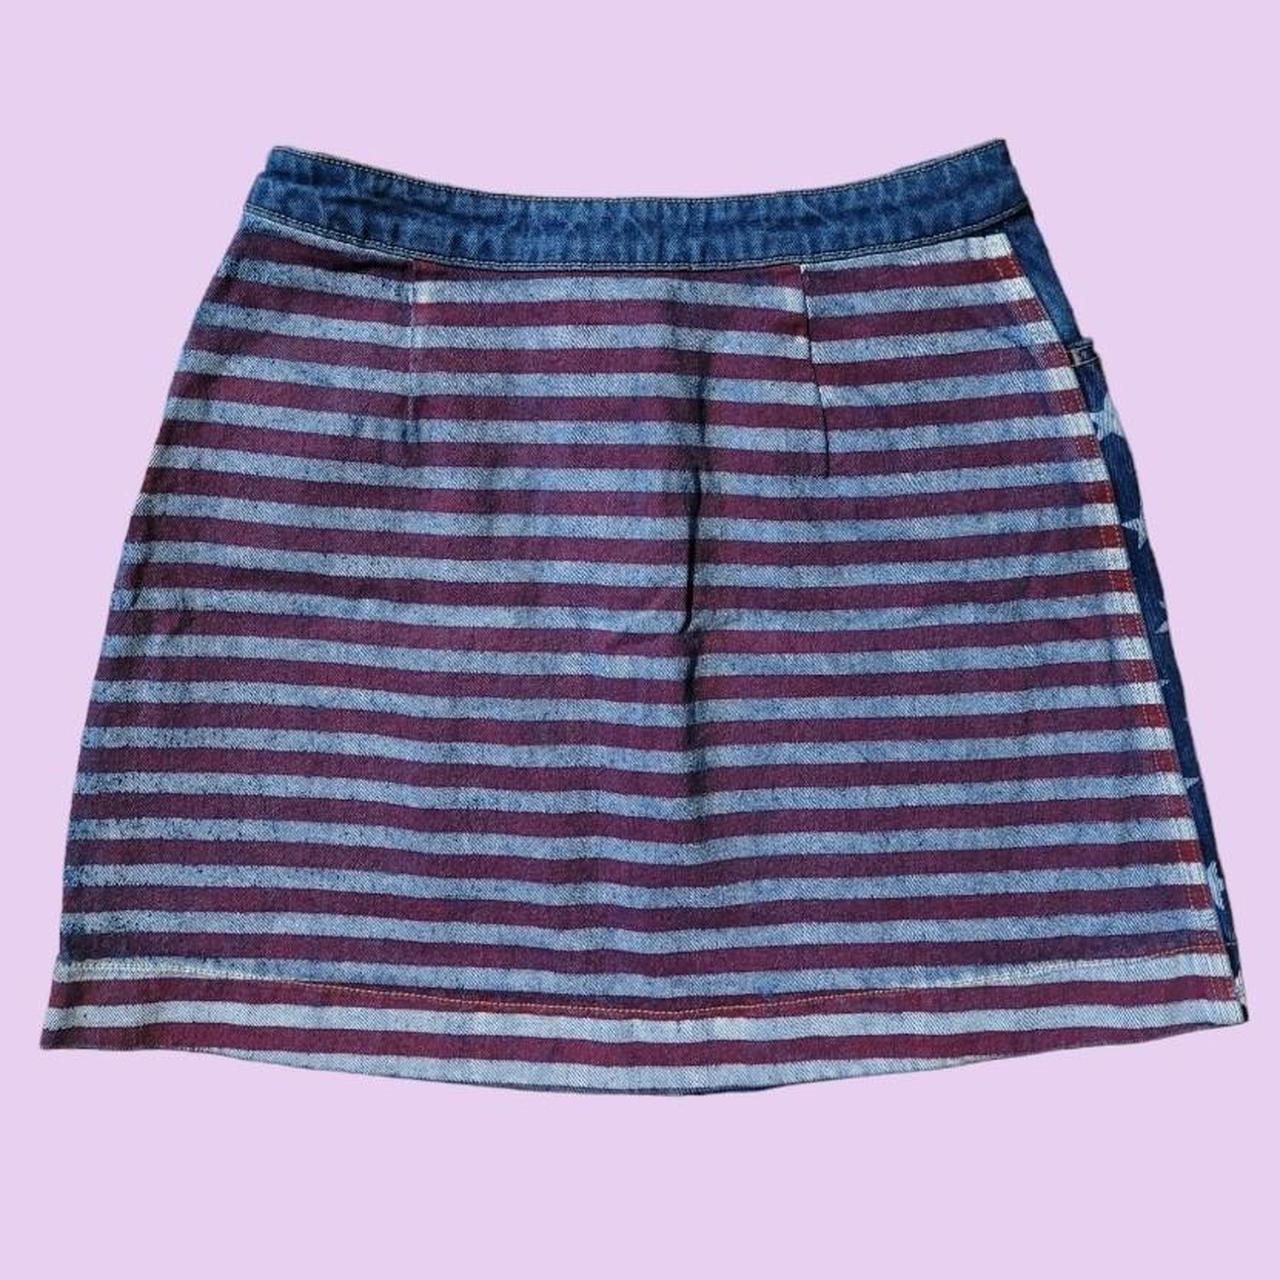 American Apparel Women's White and Blue Skirt (2)